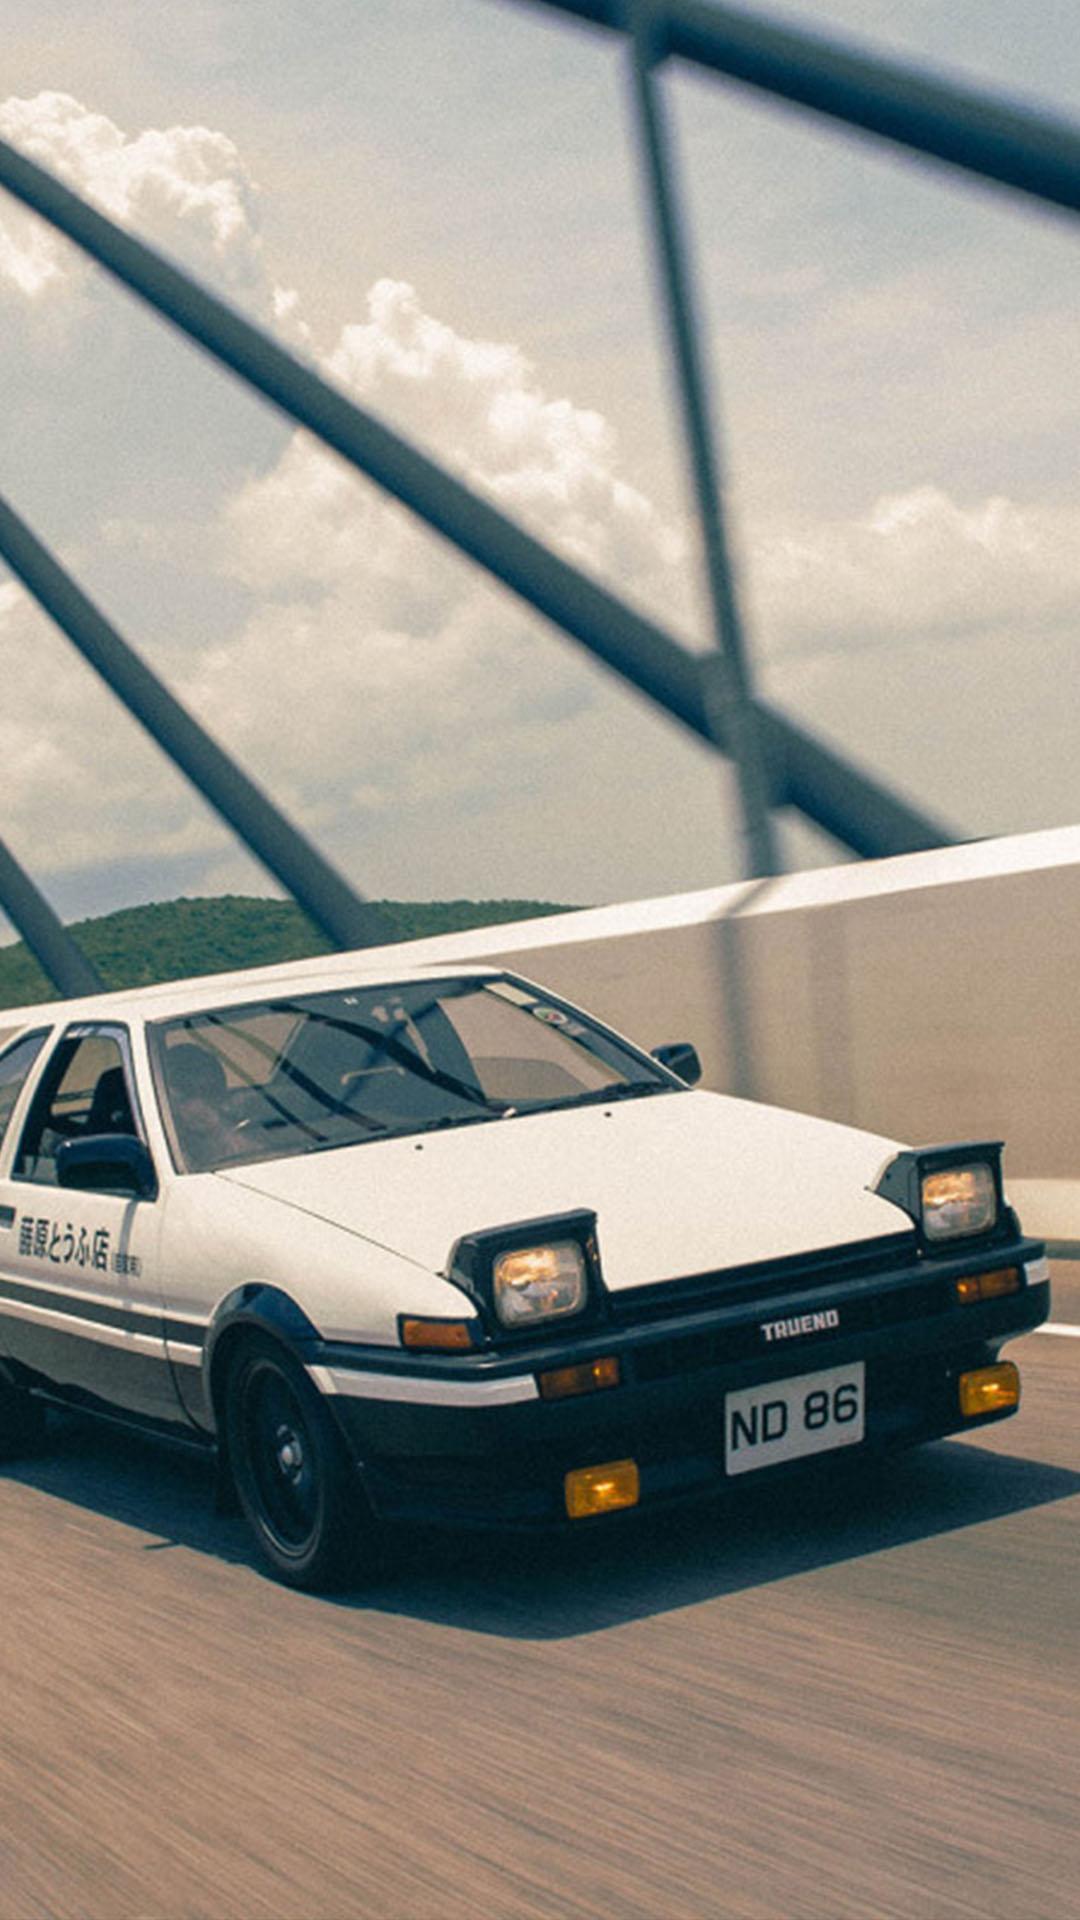 AE86 Wallpaper 1080p for Android